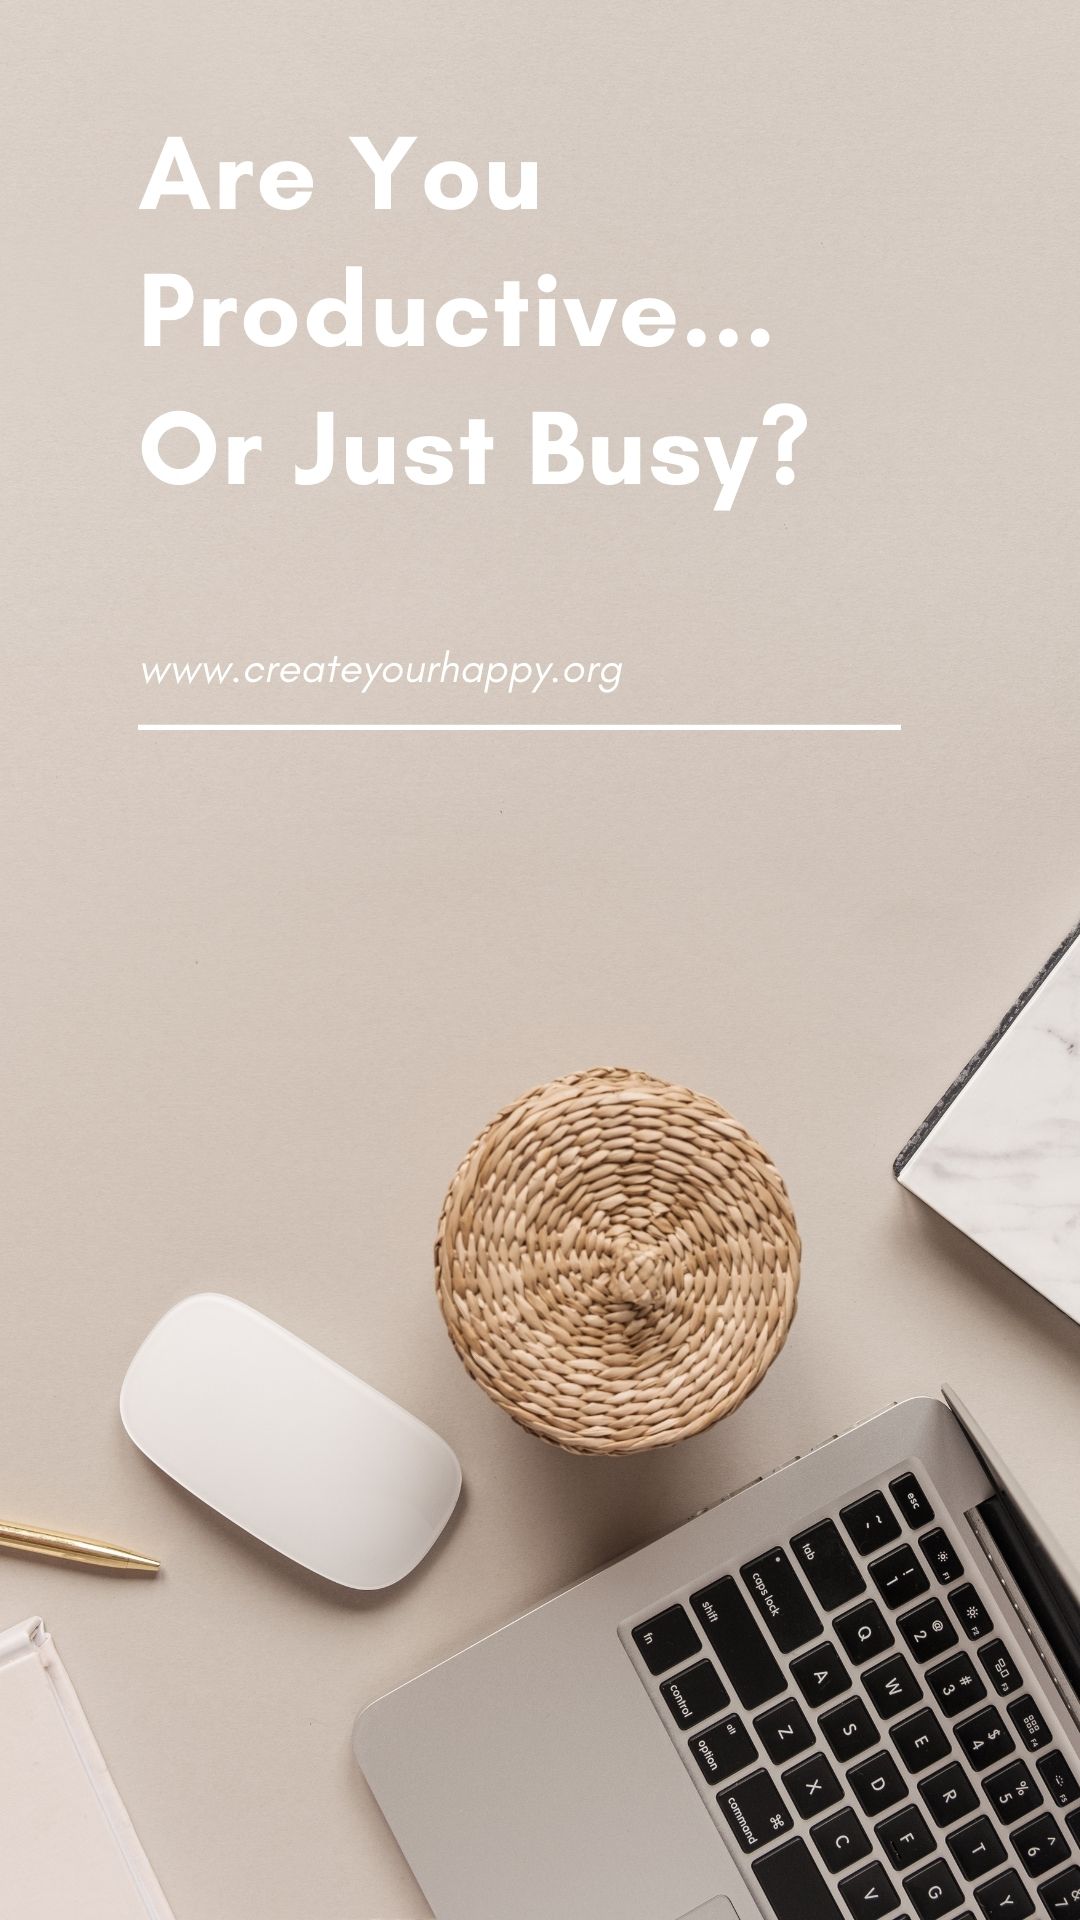 Are You Productive…Or Just Busy?